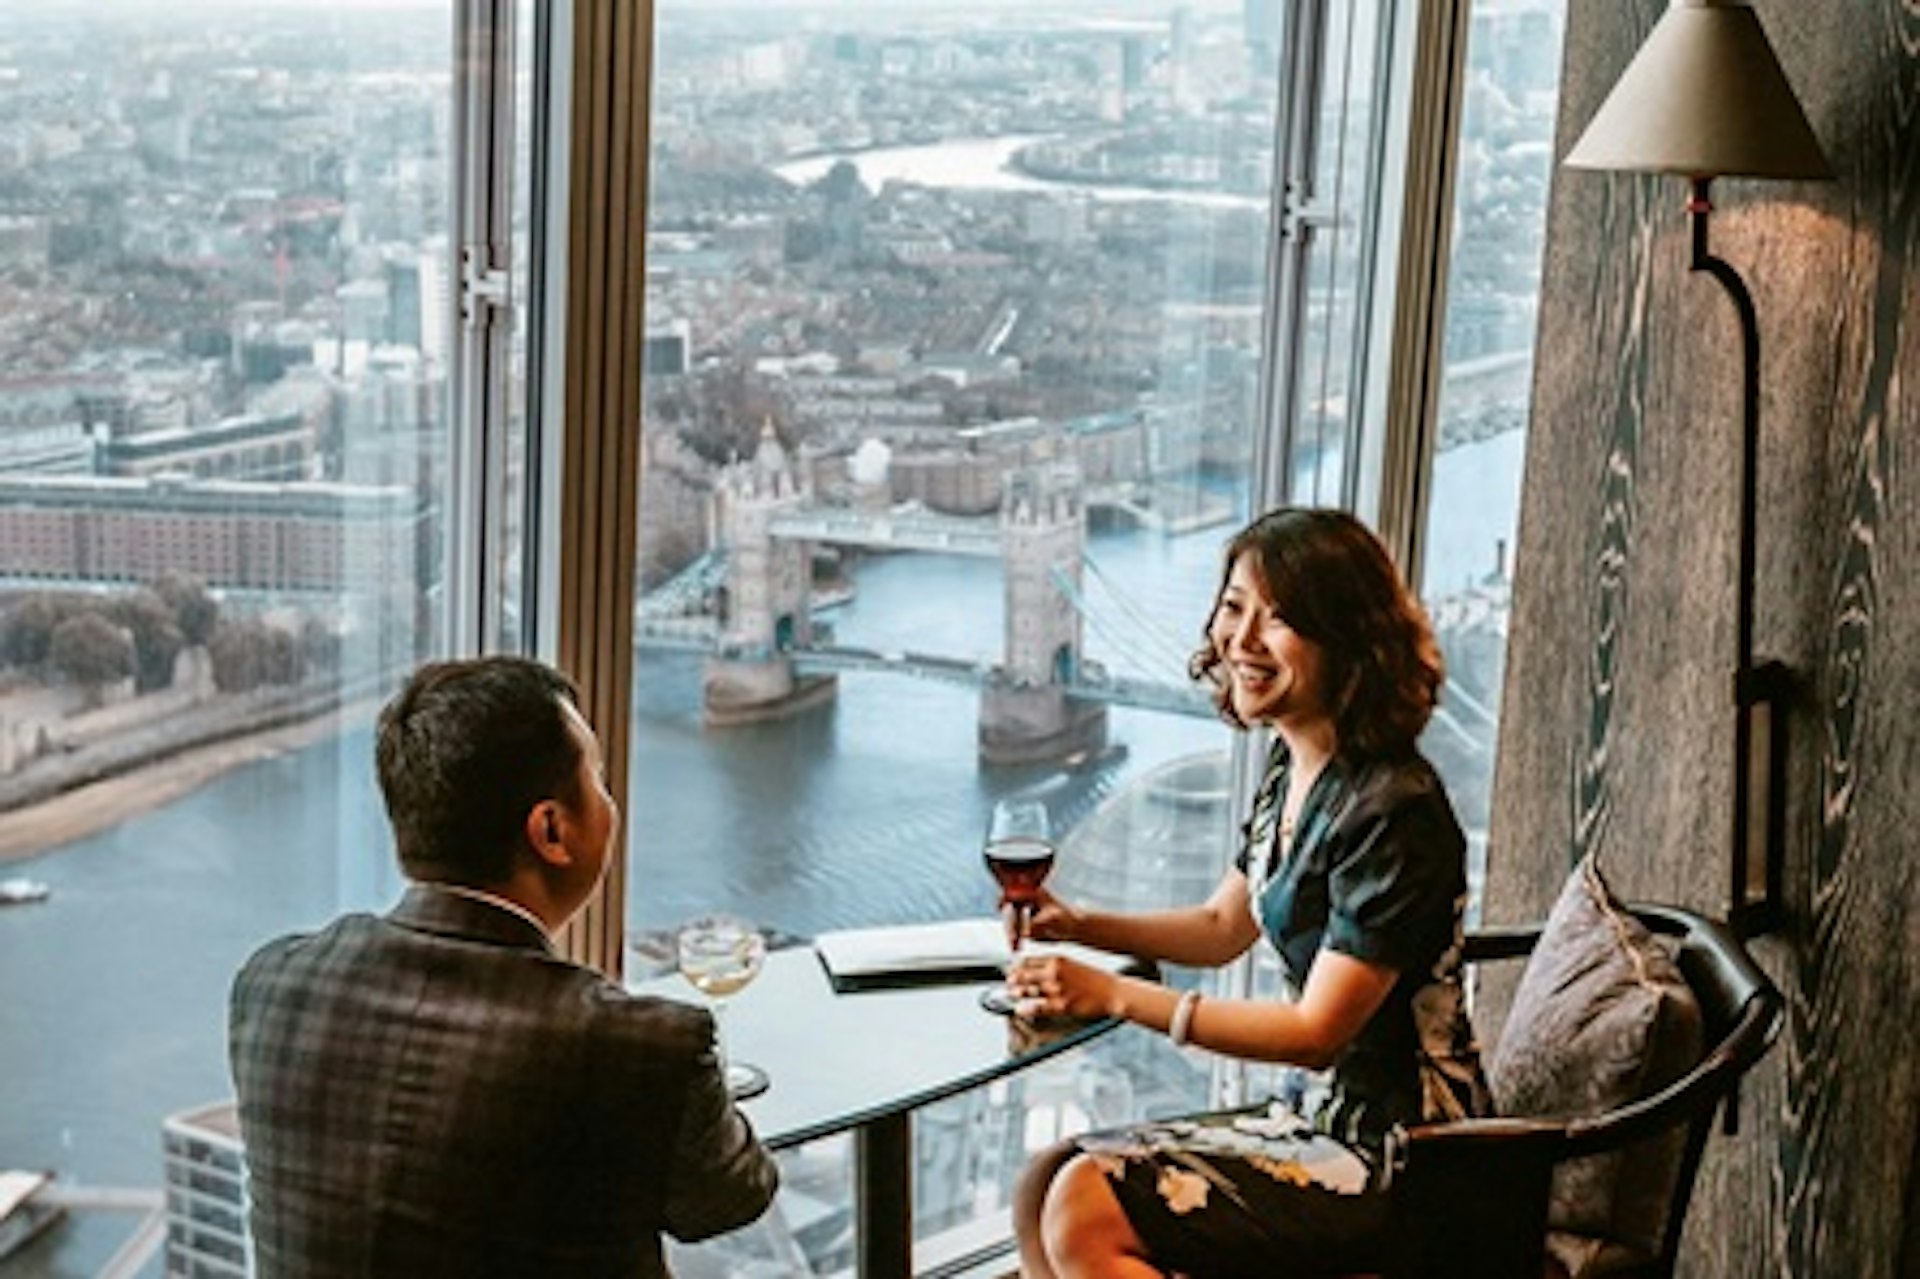 Liquid Afternoon Tea for Two at Gong within the 5* Luxury Shangri-La at The Shard, London